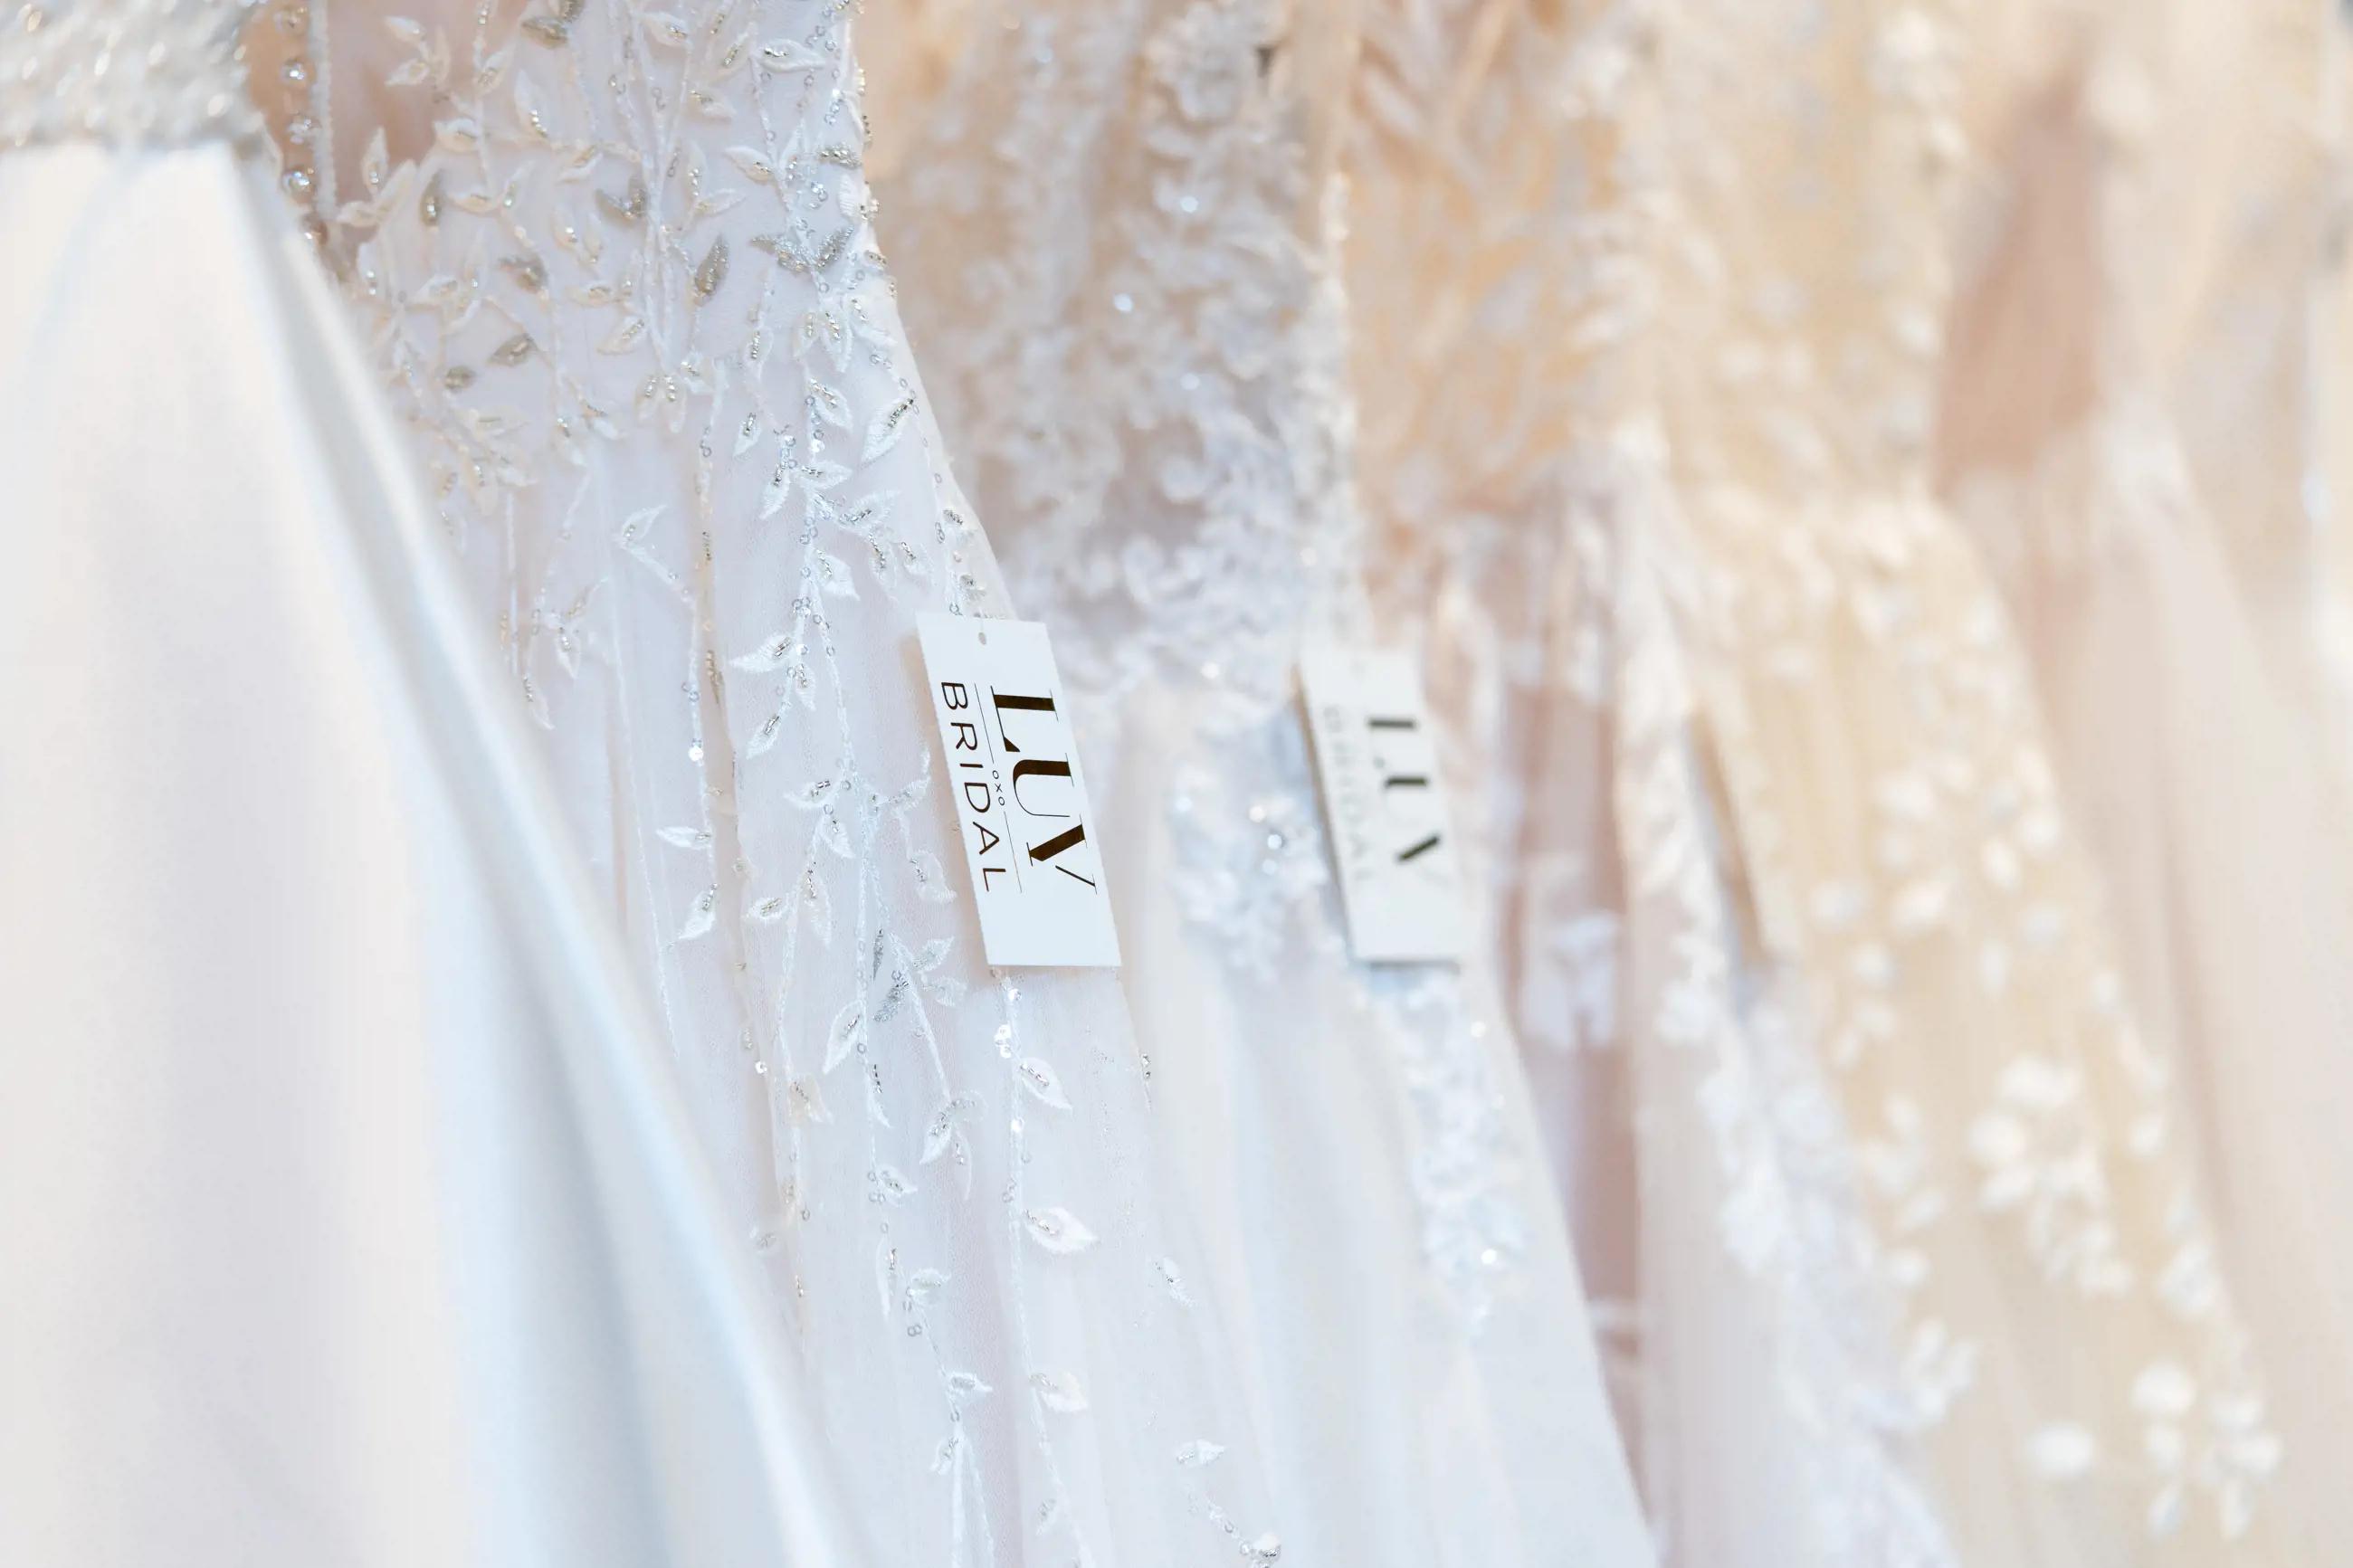 Visit The Bridal Guide to Dress Materials details page